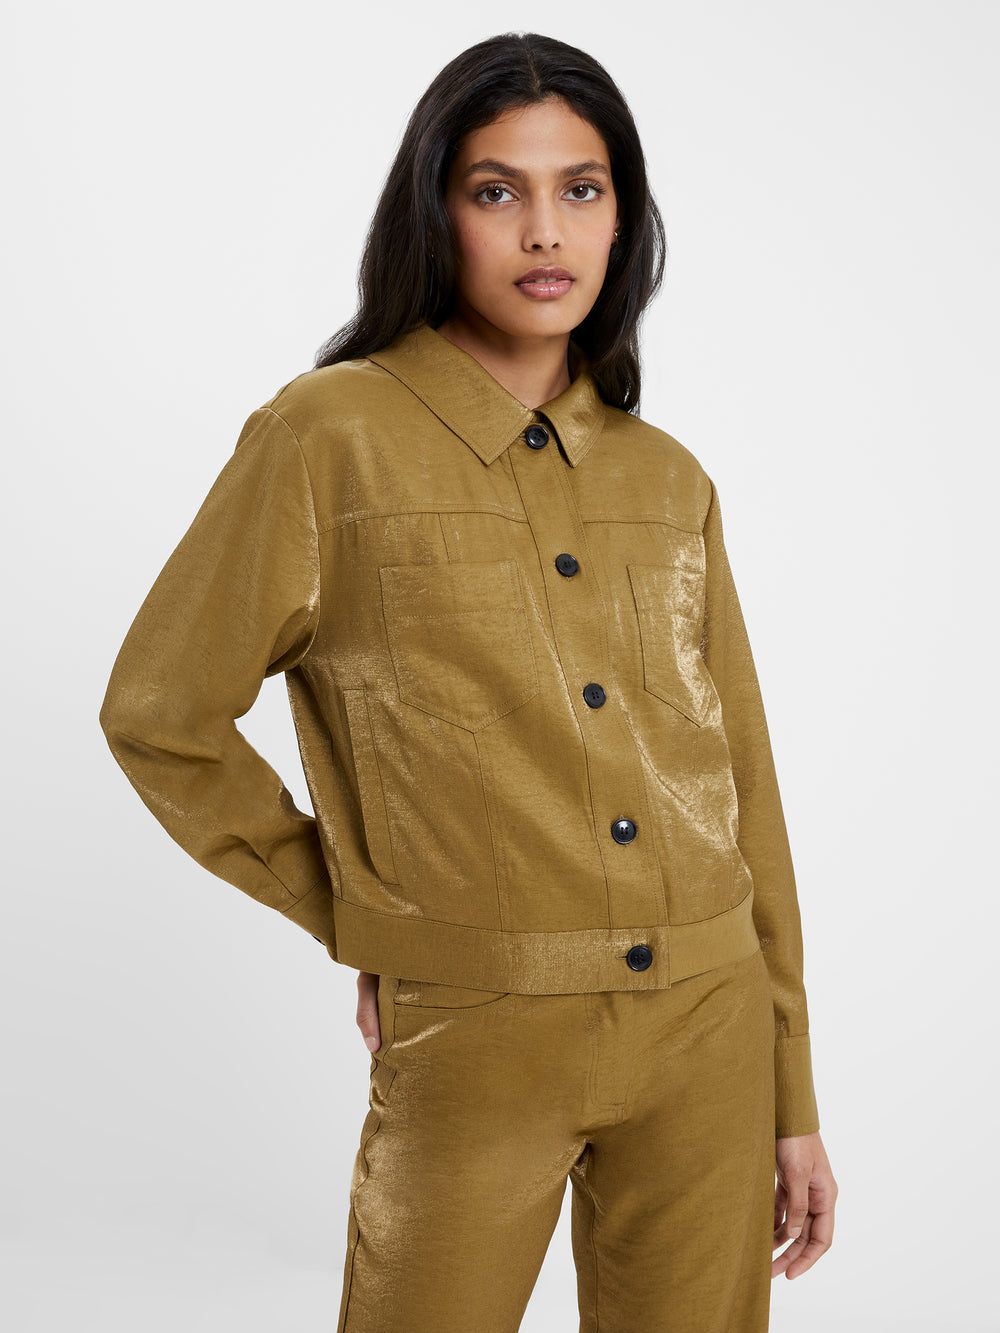 Cammie Shimmer Jacket Nutria | French Connection UK